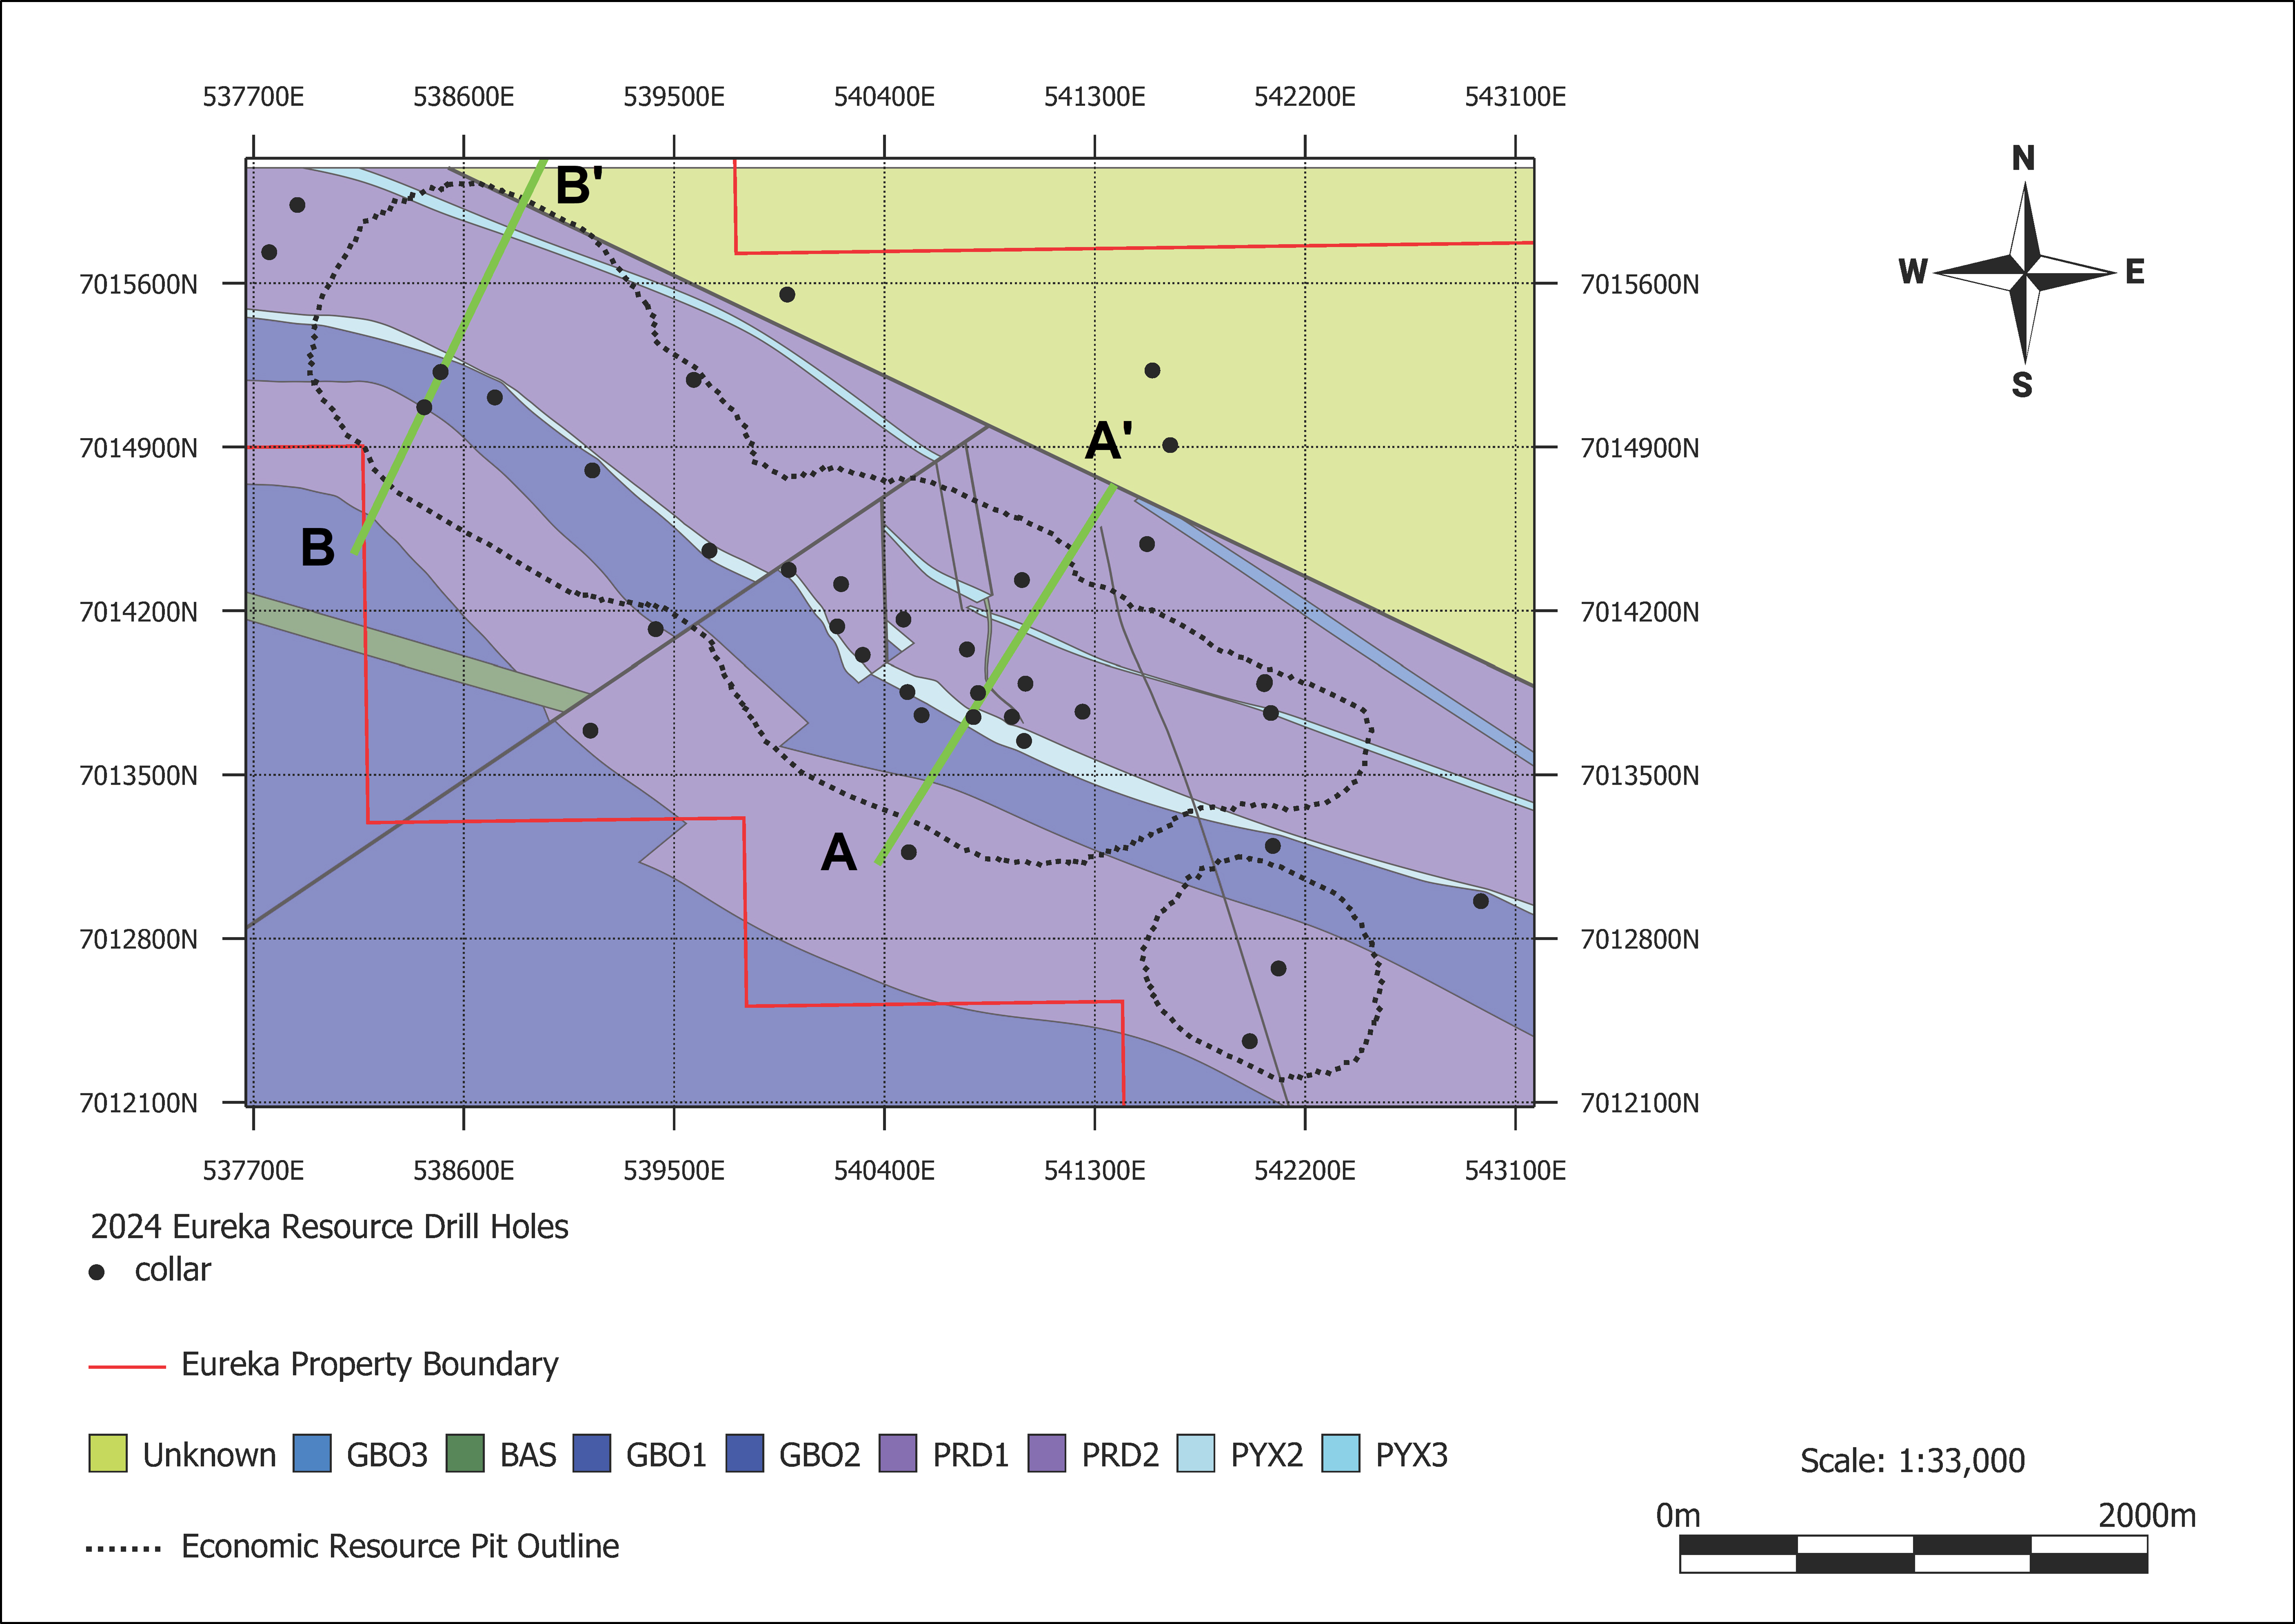 Eureka Zone overview map displaying geology, the 2024 economic resource pit outline, and drill hole locations.